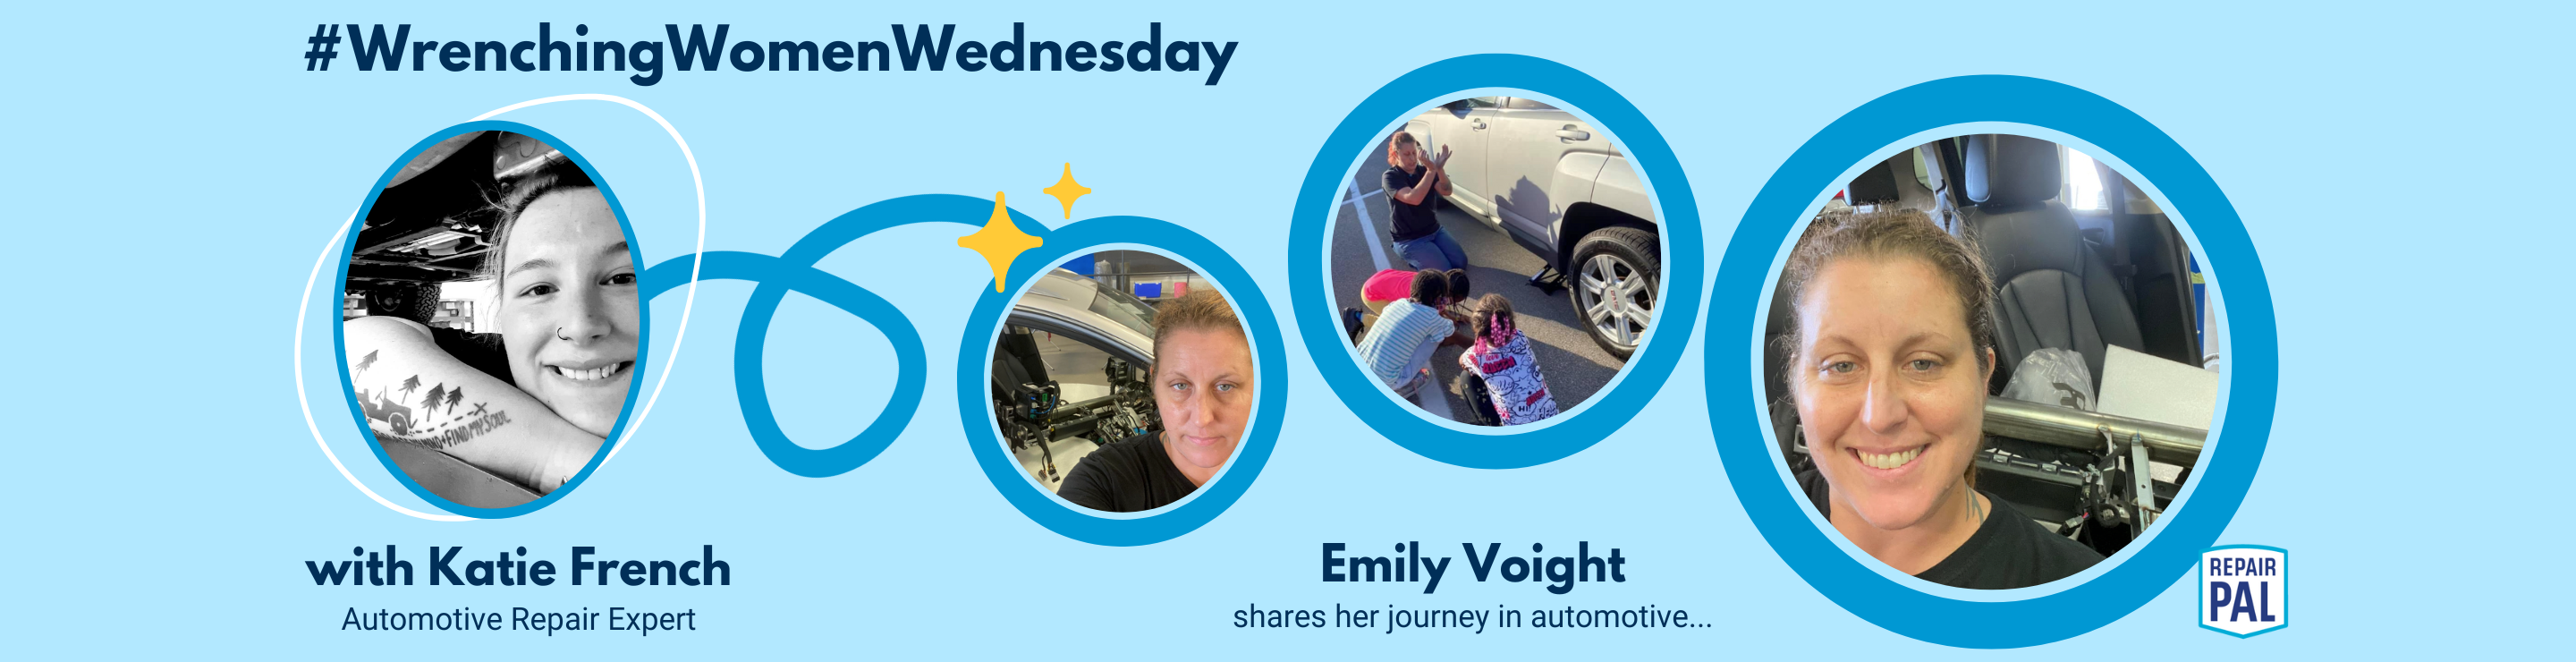 Wrenching Women Wednesday with Katie French, featuring Emily Voight, Automotive Technician